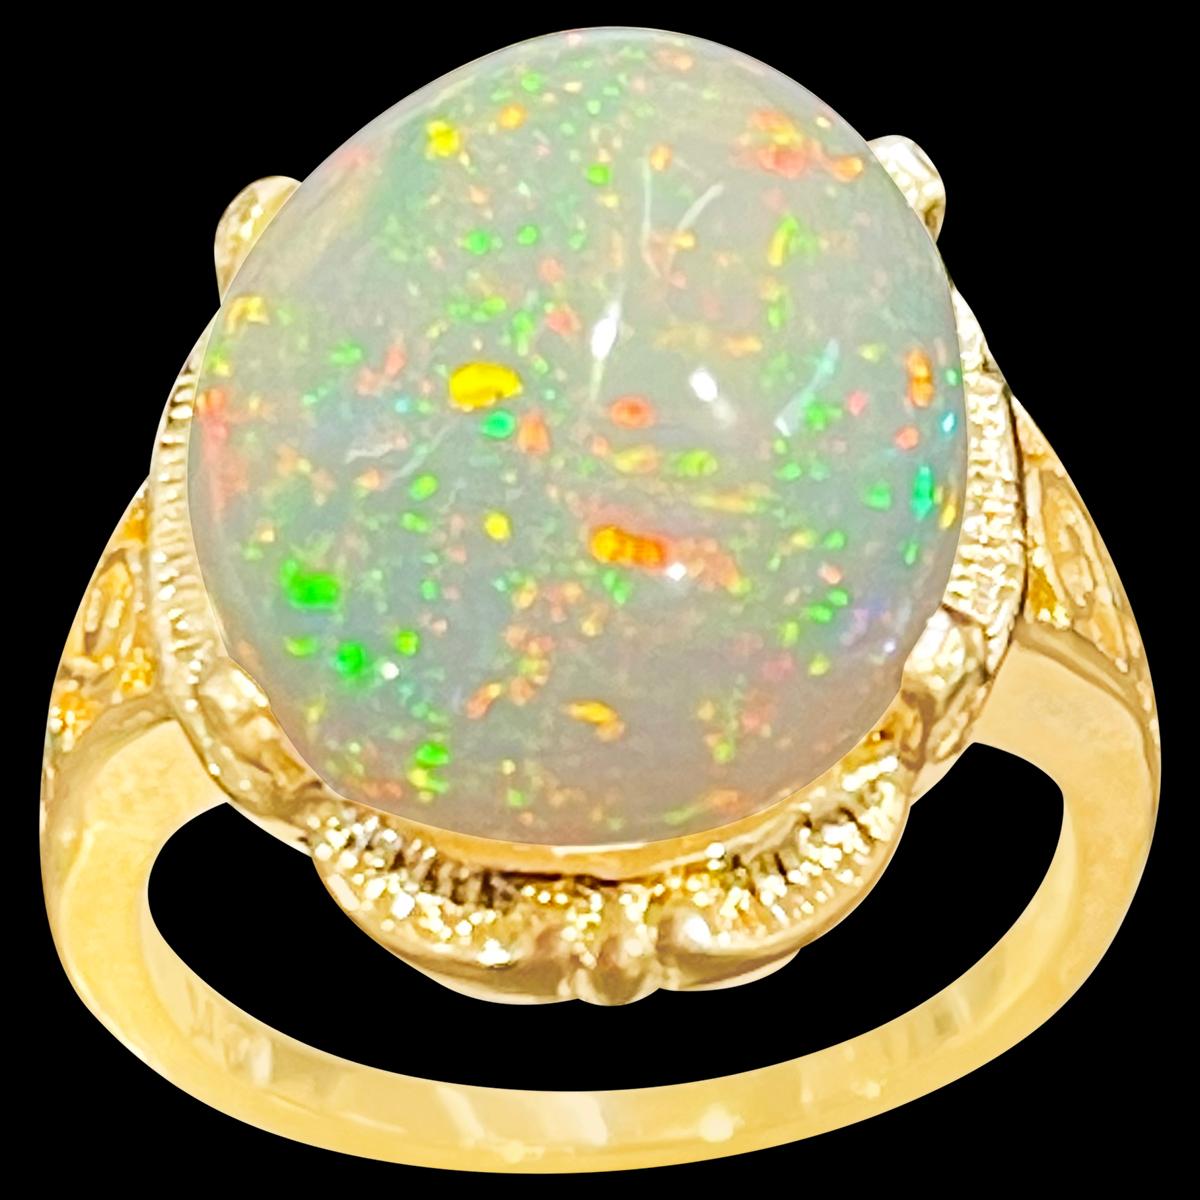 approximately 9 Carat Oval Shape Ethiopian Opal Cocktail Ring 14 Karat Yellow Gold size 5.5
Oval  Natural Opal  A classic, Cocktail ring 
14 Karat Yellow Gold Estate
Size of the opal 16 X 13 MM, Approximately 9 Ct
Amazing colors in this opal and a